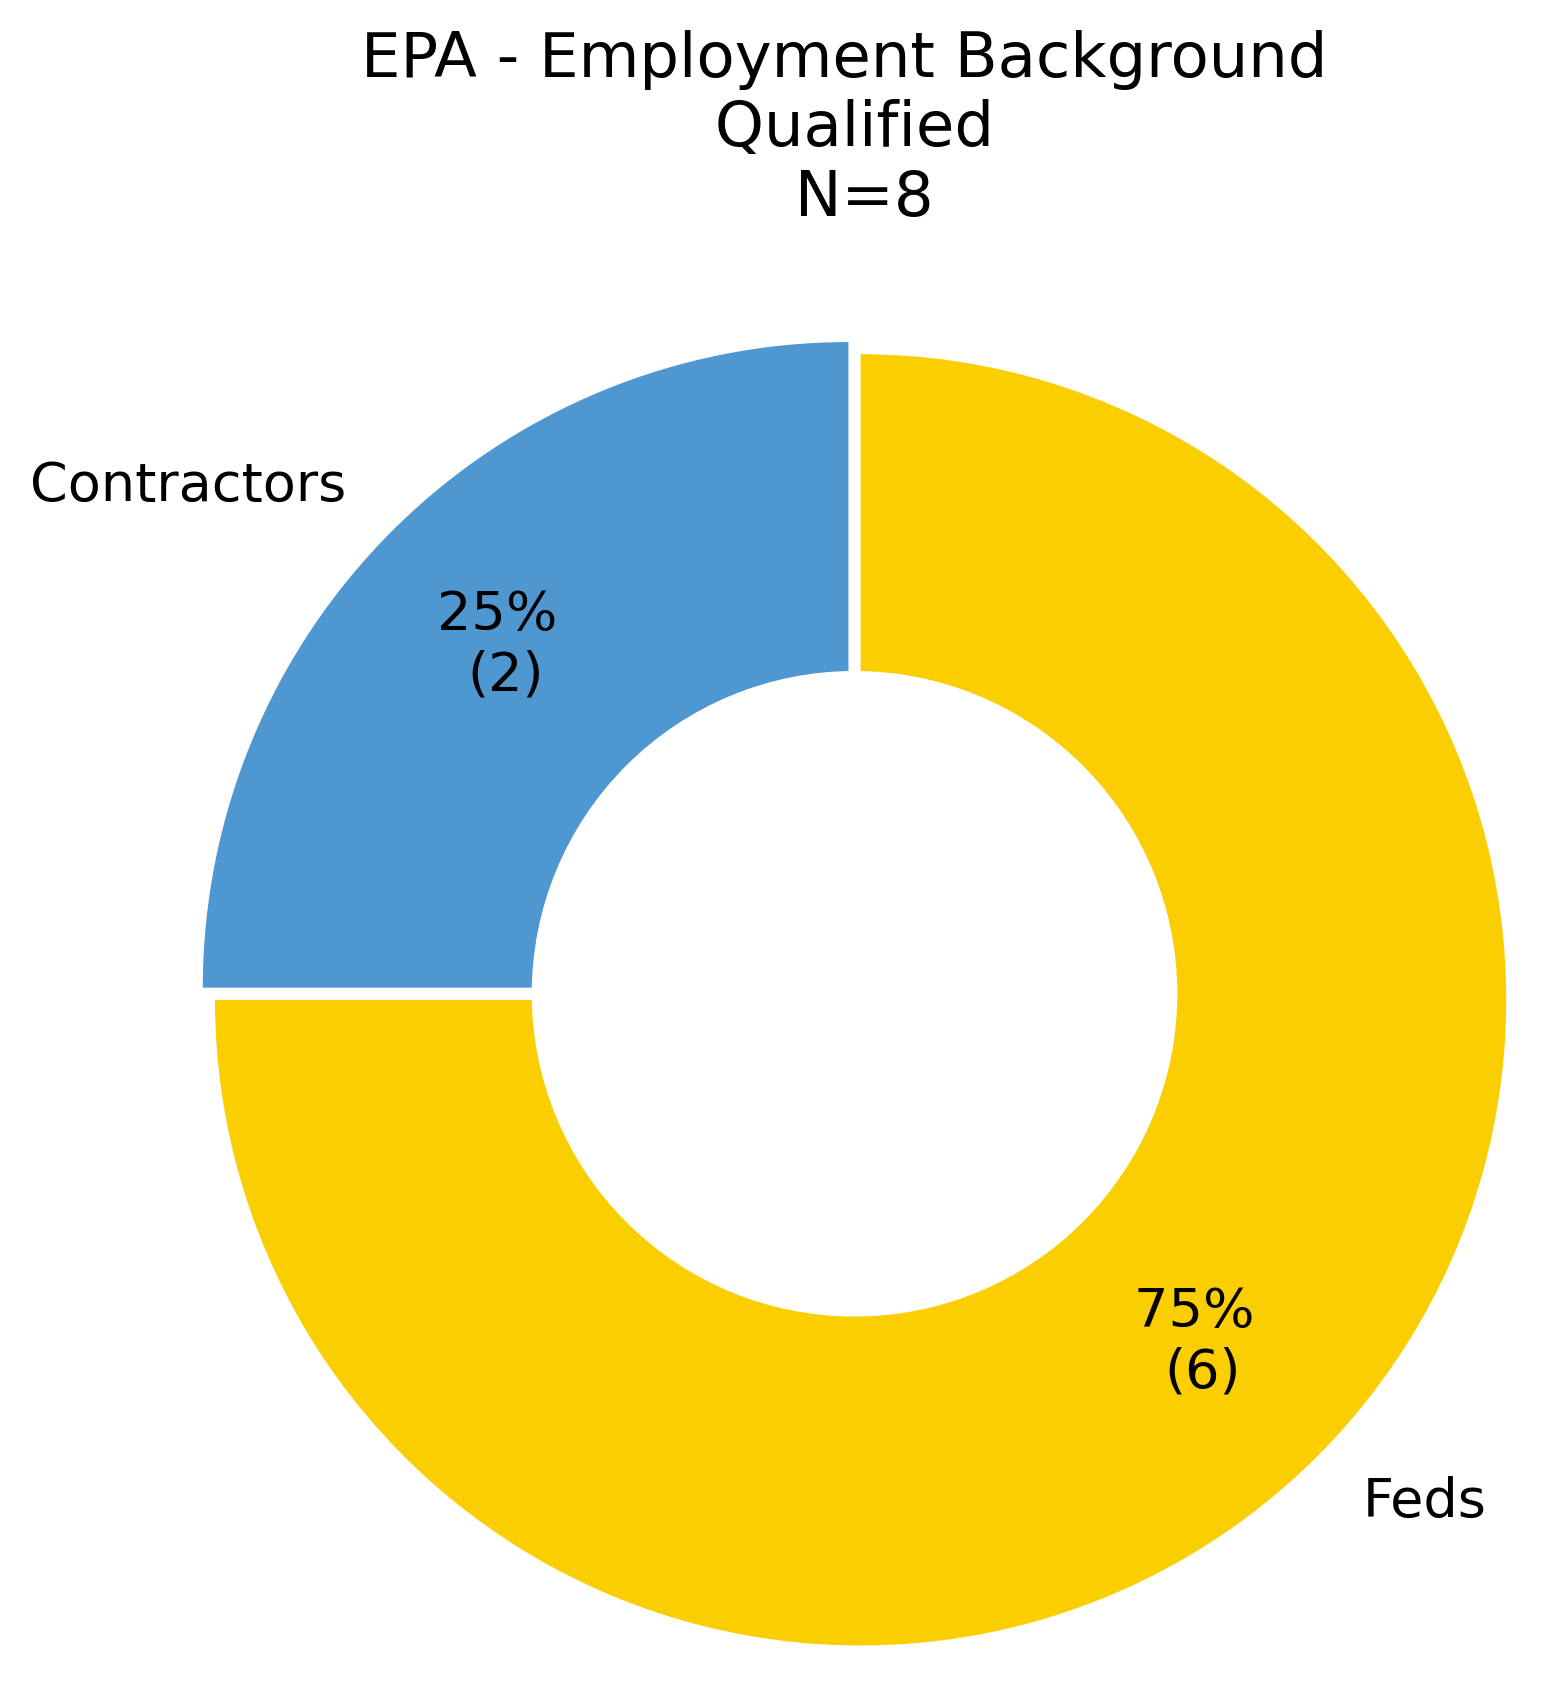 Employment background comparison for EPA round two: 8 applicants qualified, 25% contractors, 75% federal employees, 0 private sector